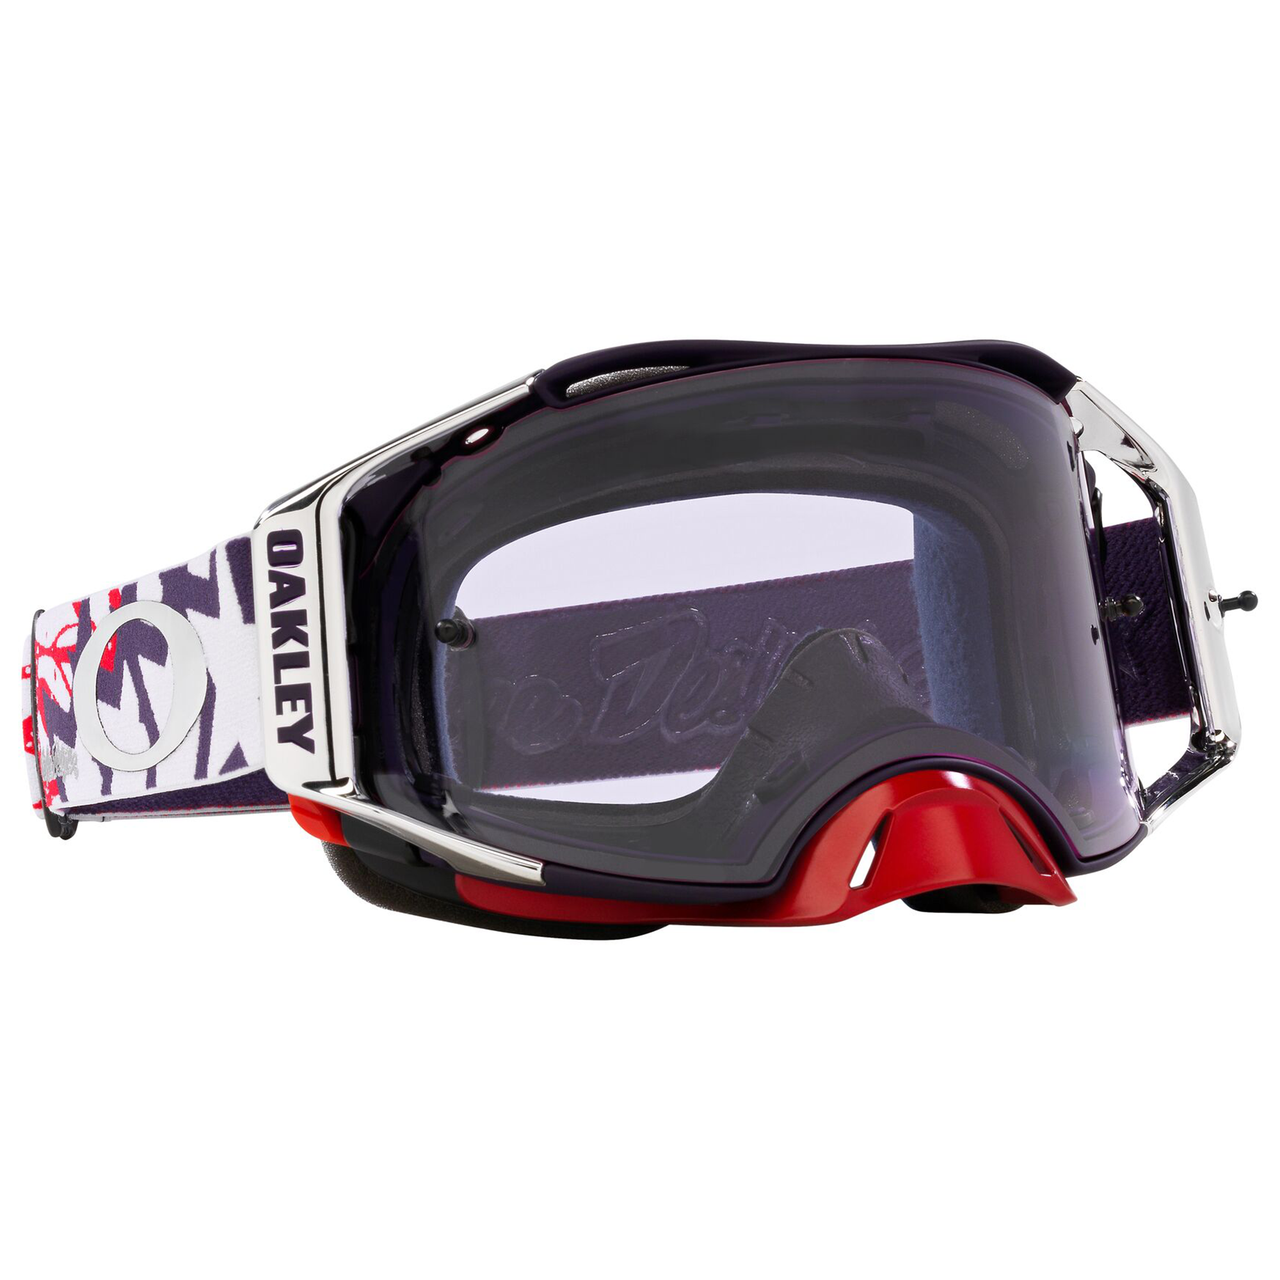 Oakley Airbrake MX TLD Collection Goggle Red/White/Blue Stars - Prizm Low Light Lens